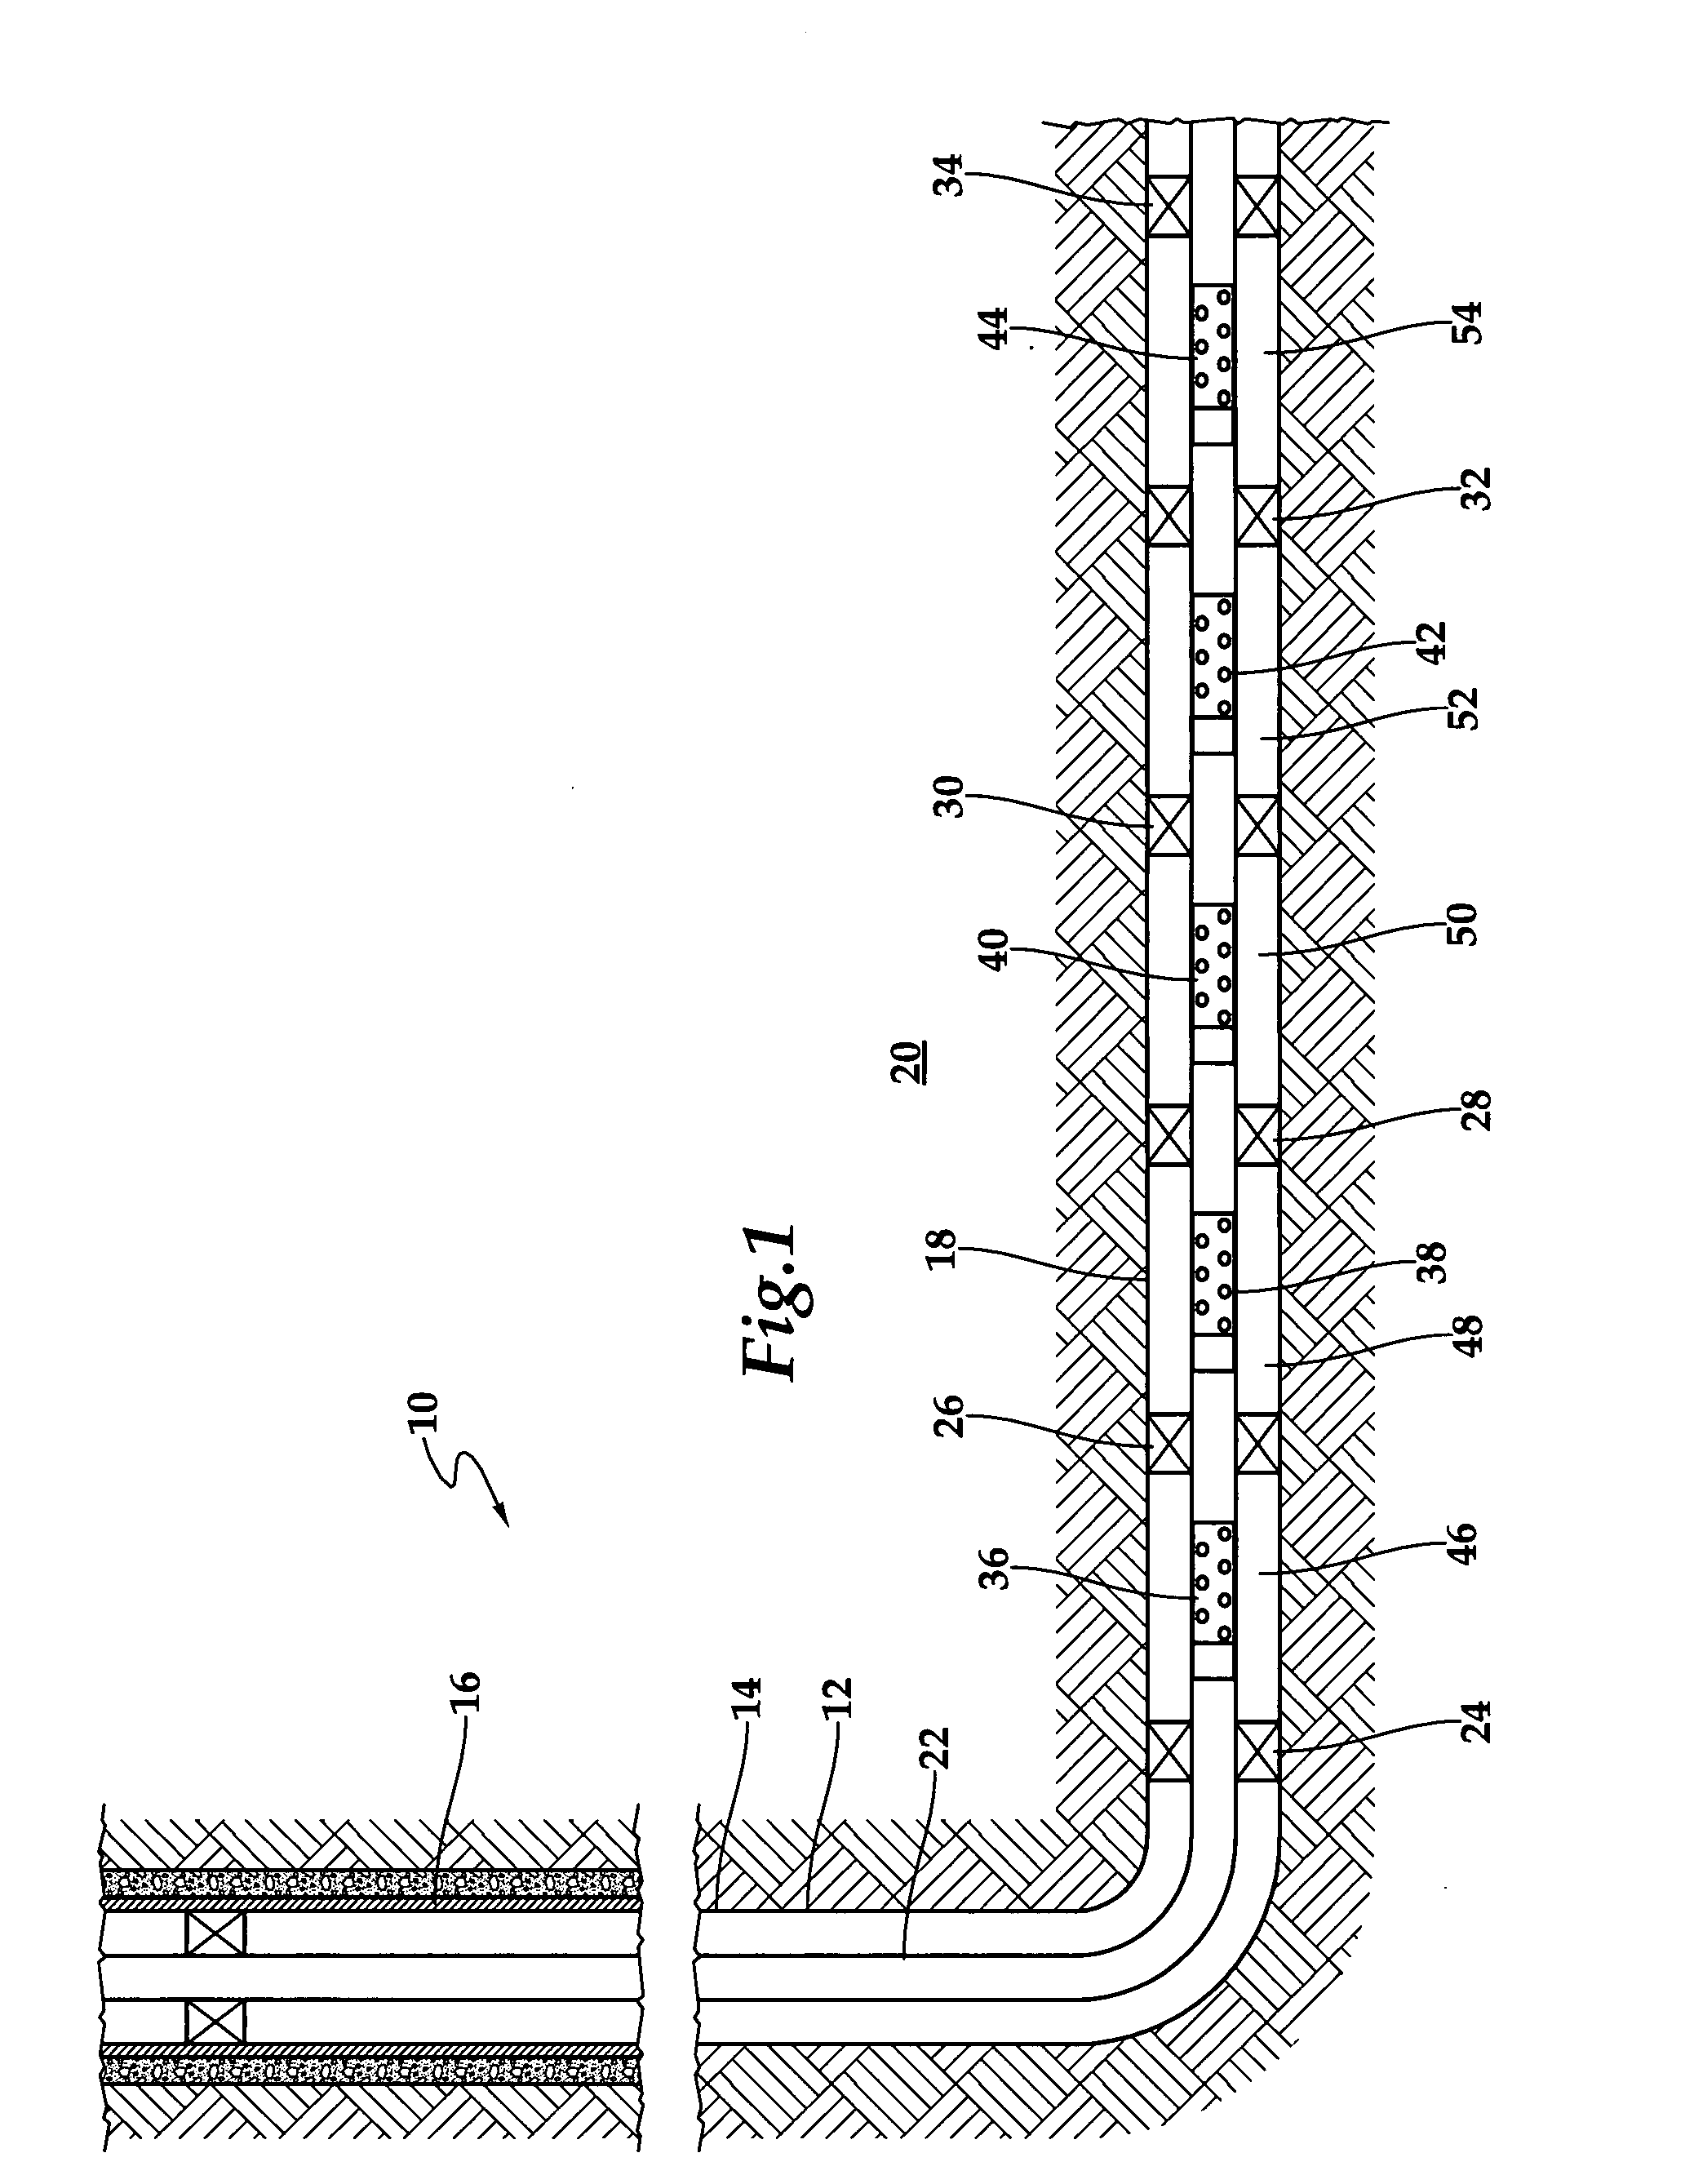 Apparatus for autonomously controlling the inflow of production fluids from a subterranean well